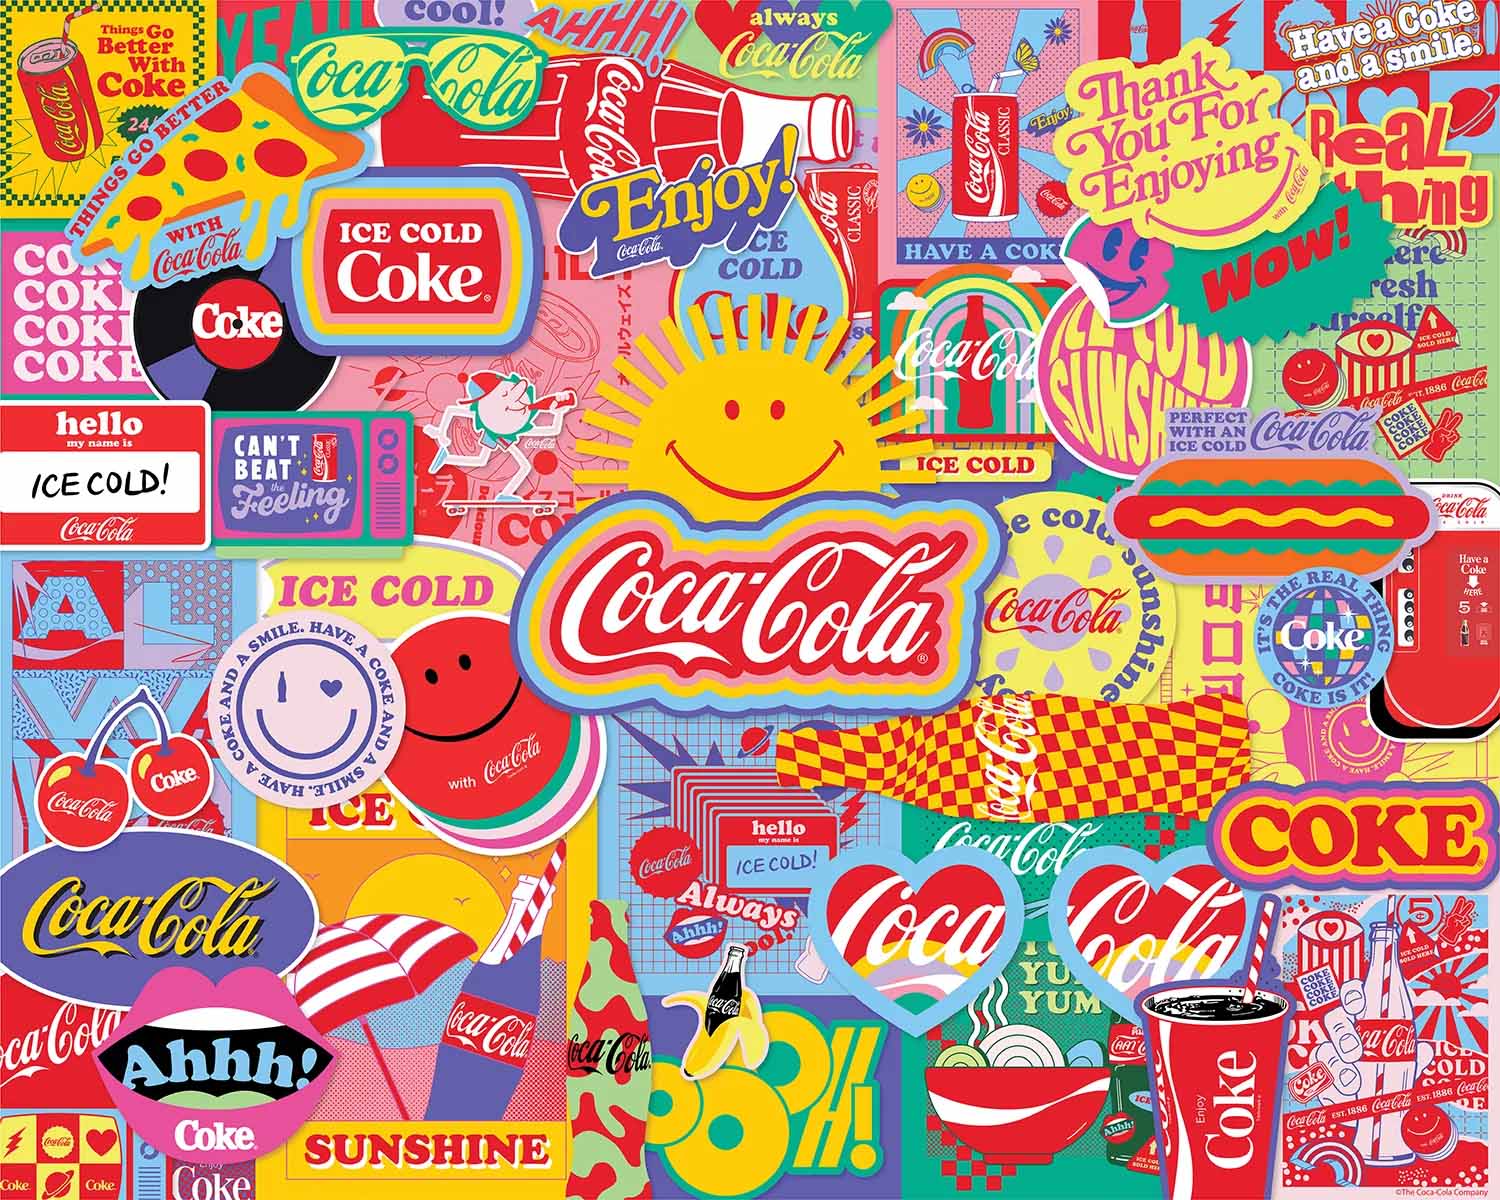 Coca-Cola Pop Art Food and Drink Jigsaw Puzzle